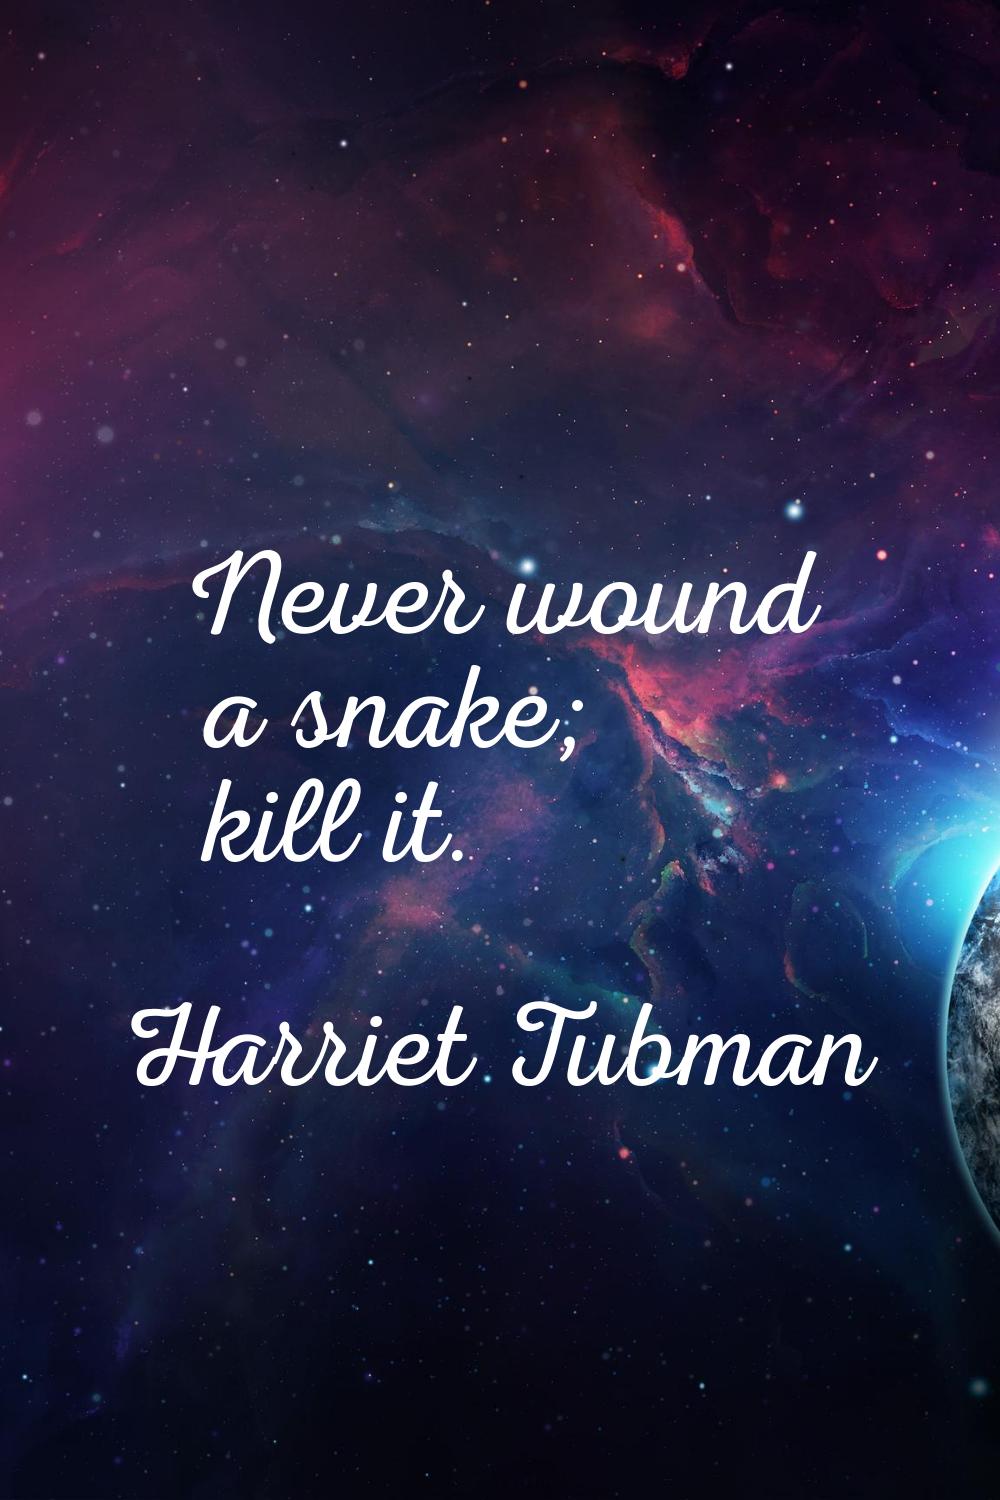 Never wound a snake; kill it.